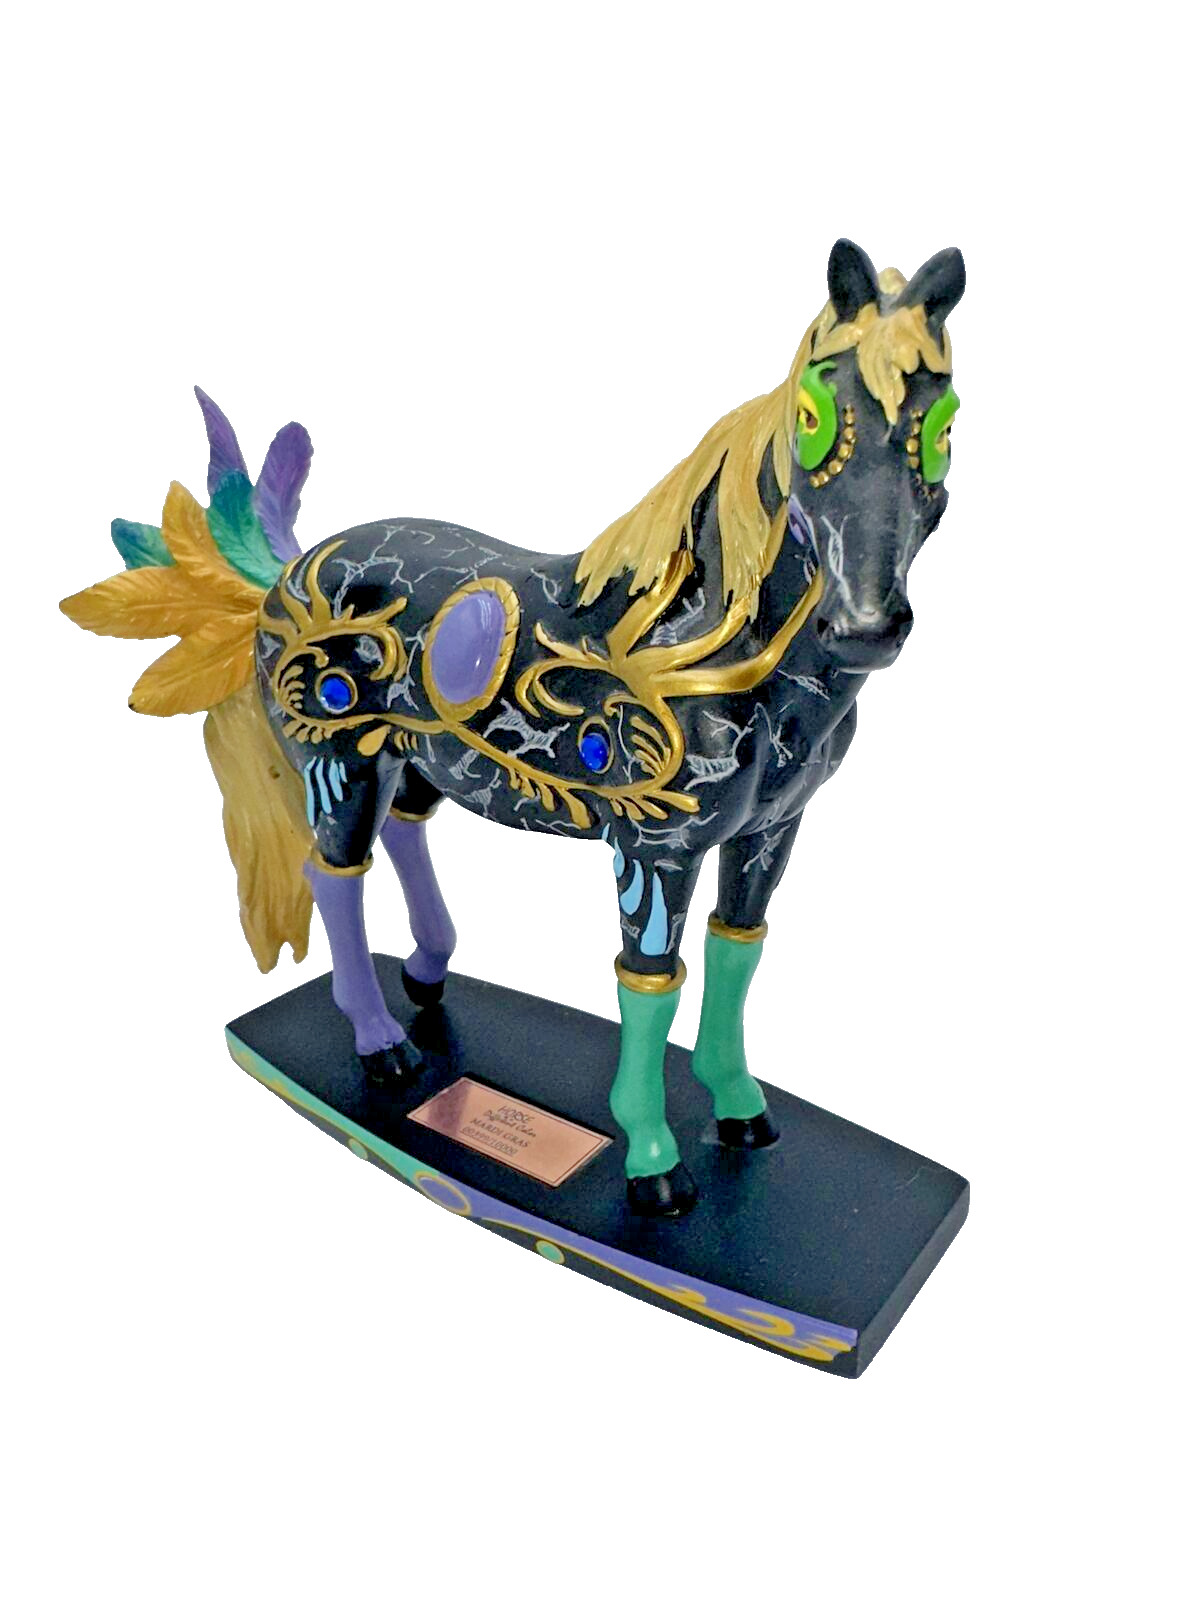 2014 Mardi Gras Horse of a Different Color 399/10,000 #20372 by Jeff Carillo